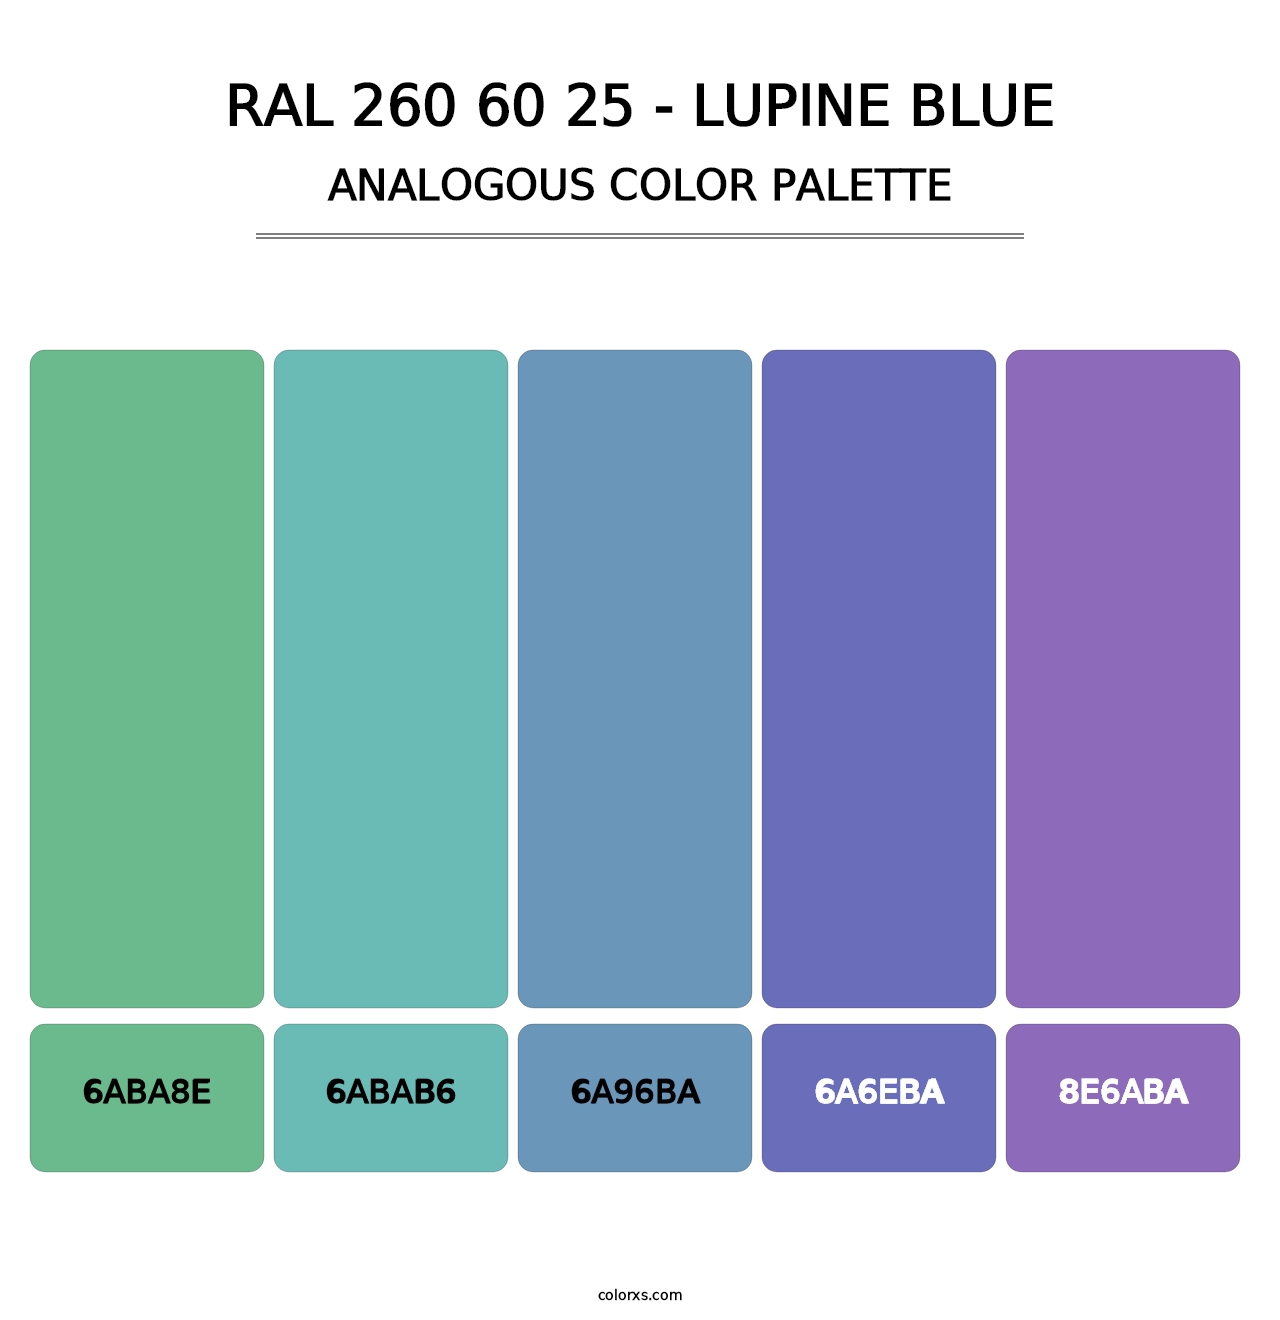 RAL 260 60 25 - Lupine Blue - Analogous Color Palette